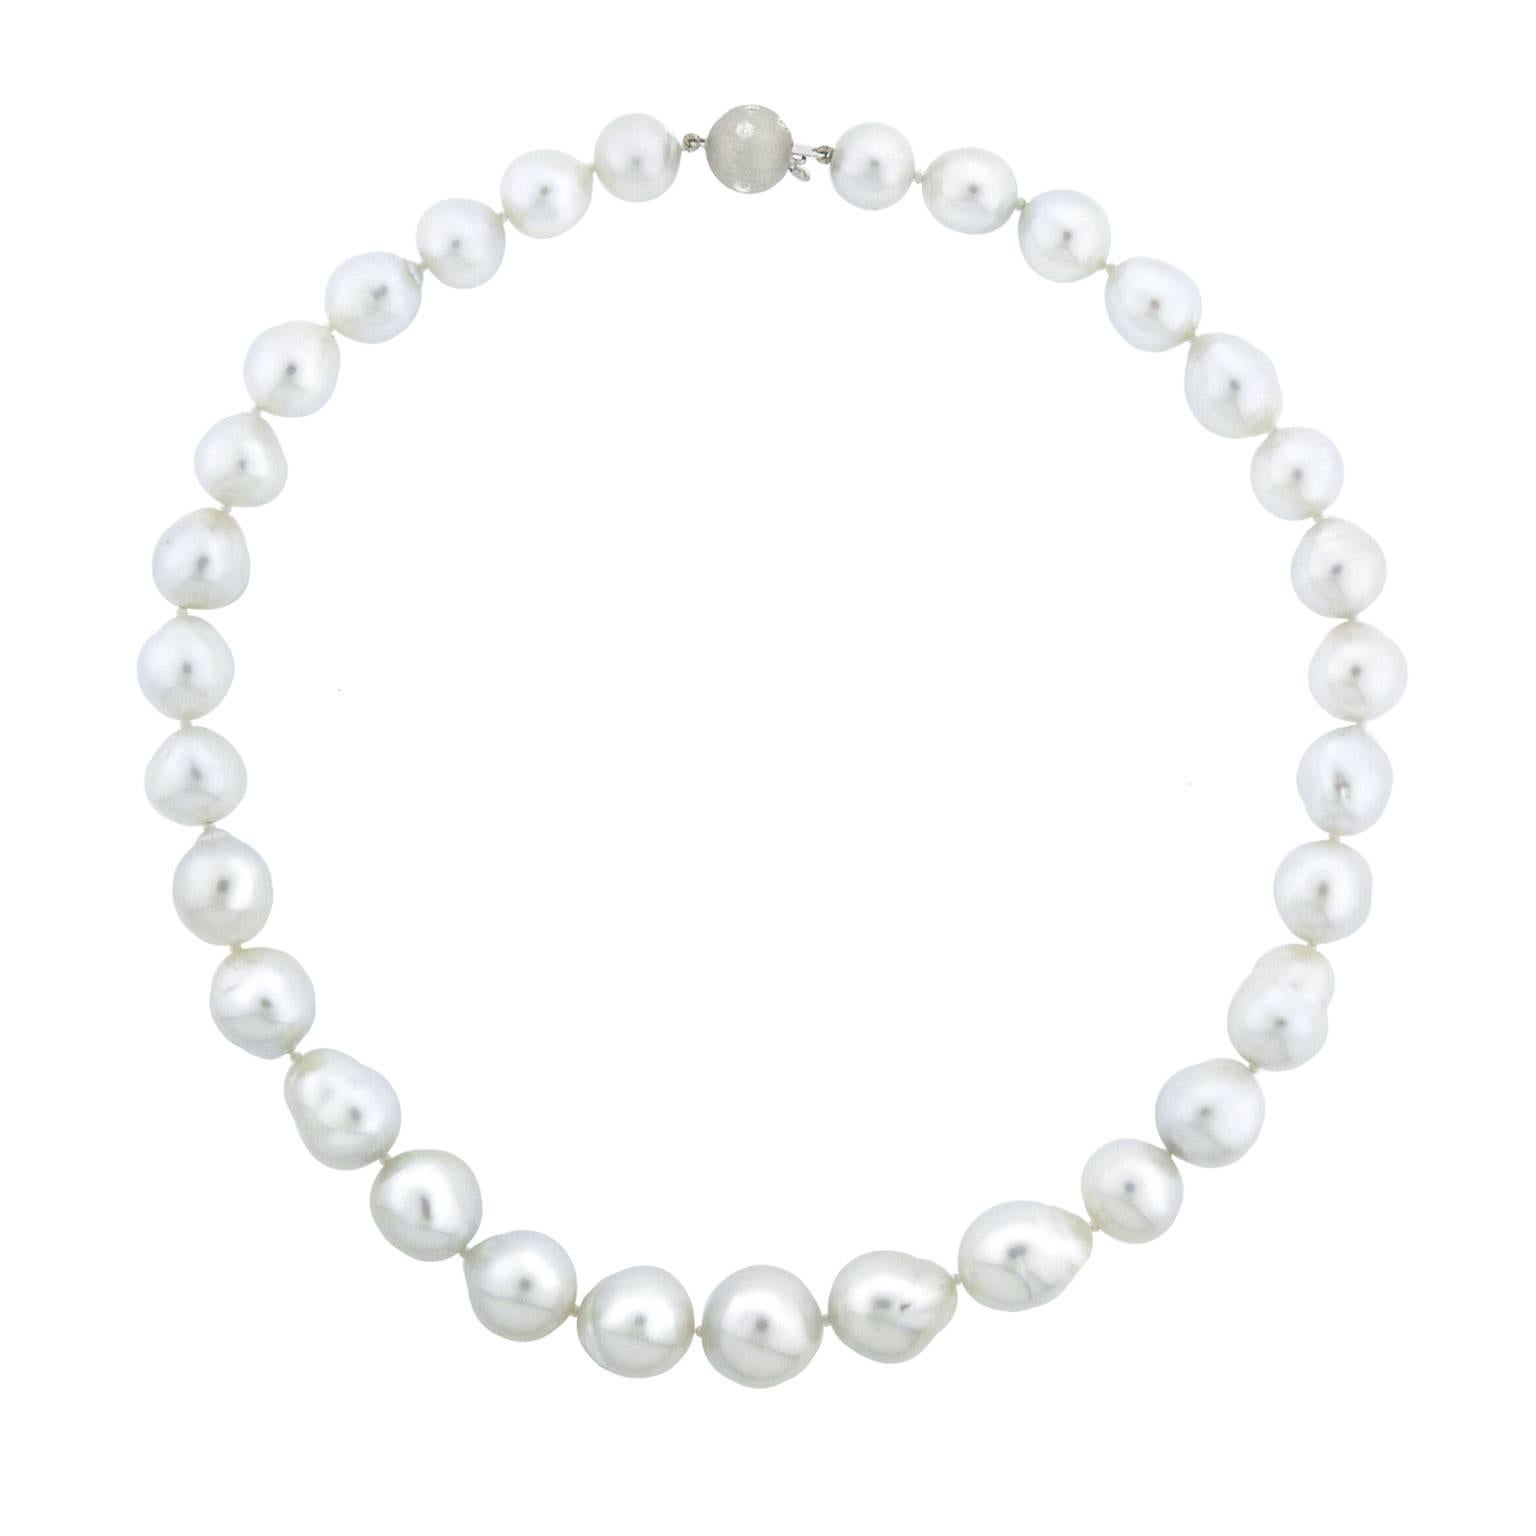 31 semi-baroque pearls range in size from 9.9 to 13.2 millimeter. The luster is extremely high, the surface is mostly free of blemishes and the color is a silver white with accents of pale pink and green. The clasp is 14 karat white gold, has a